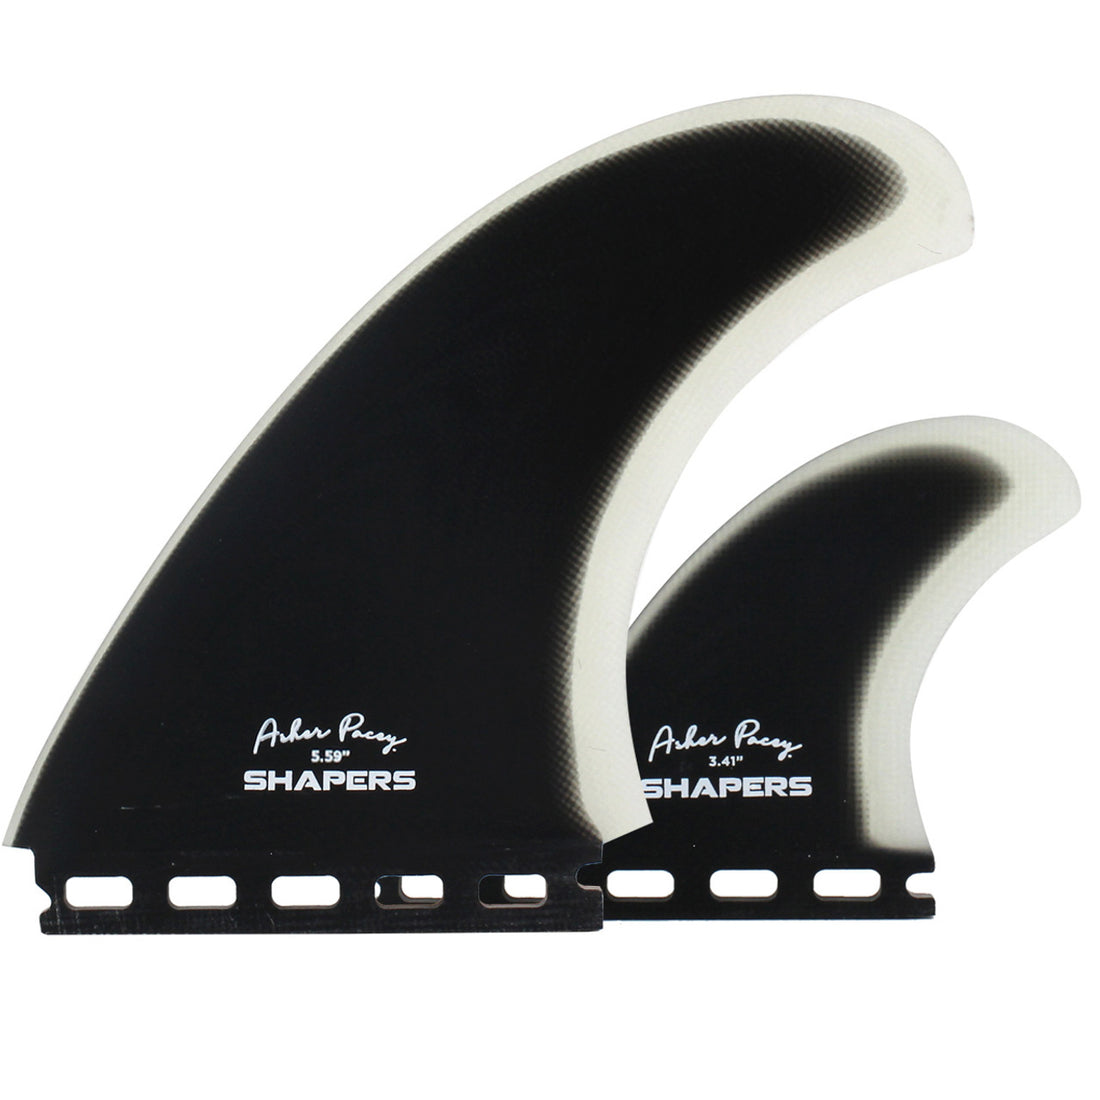 Shapers Fins - AP 5.59" (Futures) Asher Pacey Twin Fins + Trailer - Black/Clear